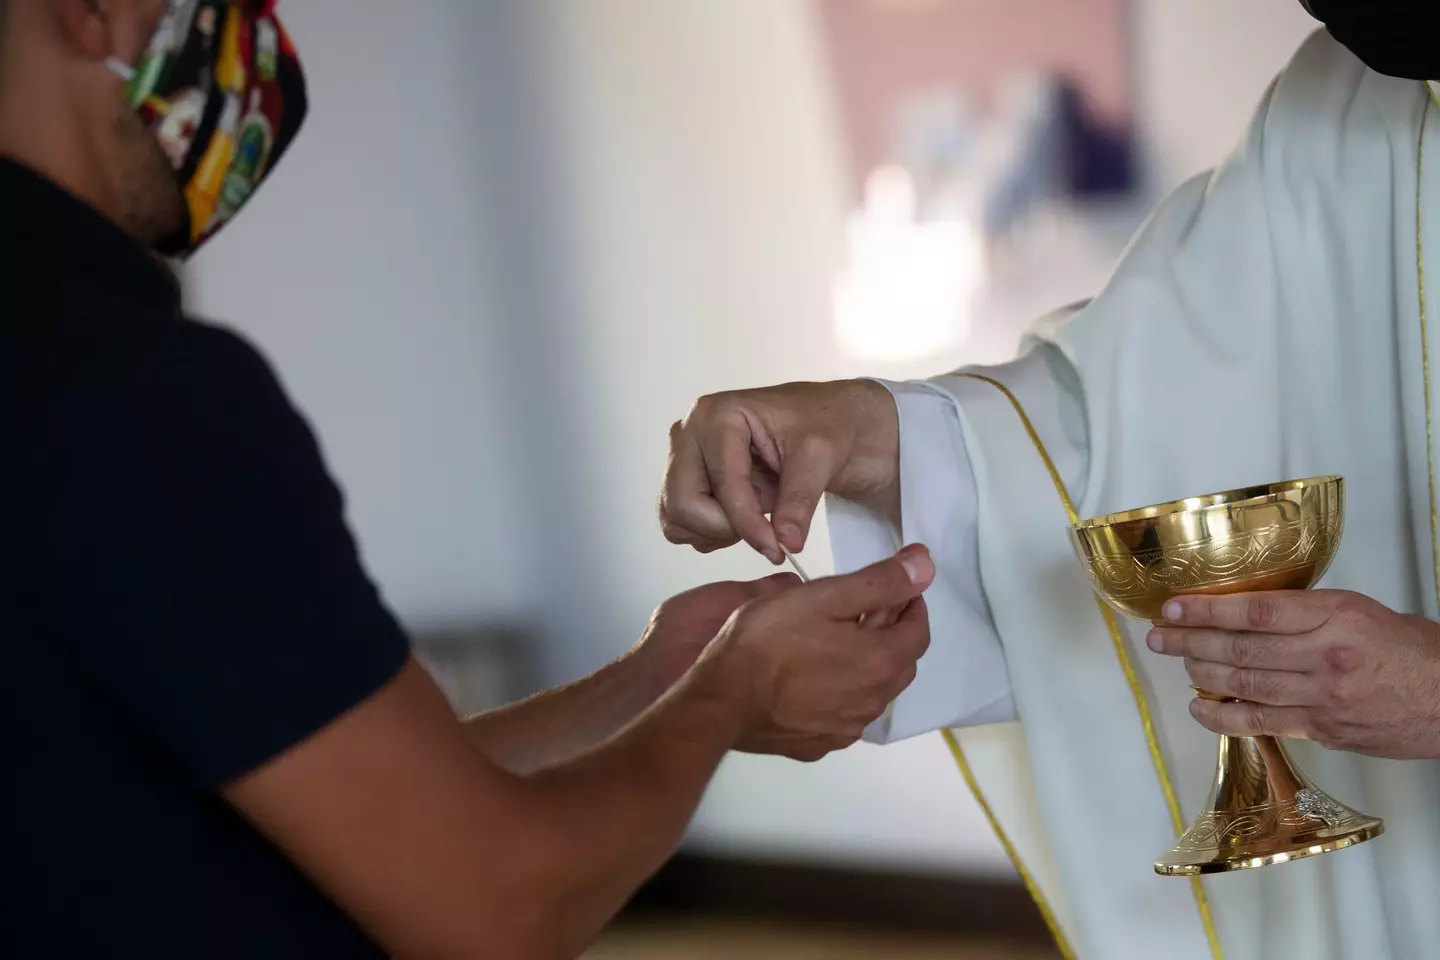 Father Andres Arango distributing communion at St. Gregory's Catholic Church in May 2020.